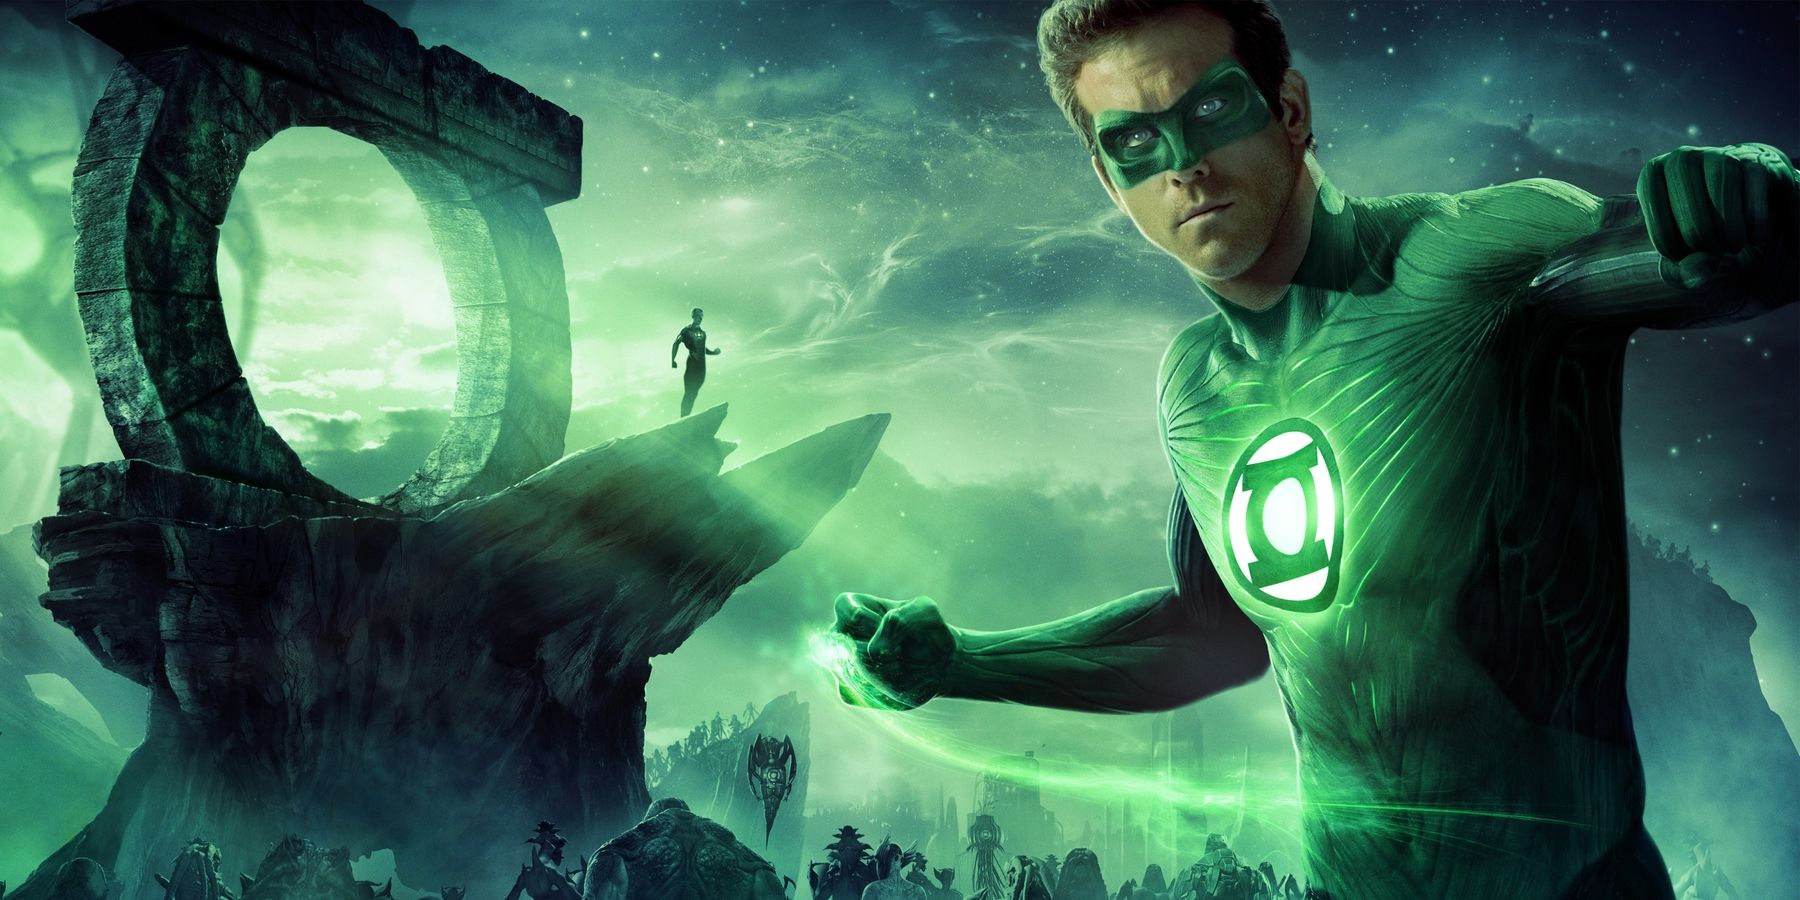 Ryan Reynolds powers up as Green Lantern, with an emerald alien world in the background.